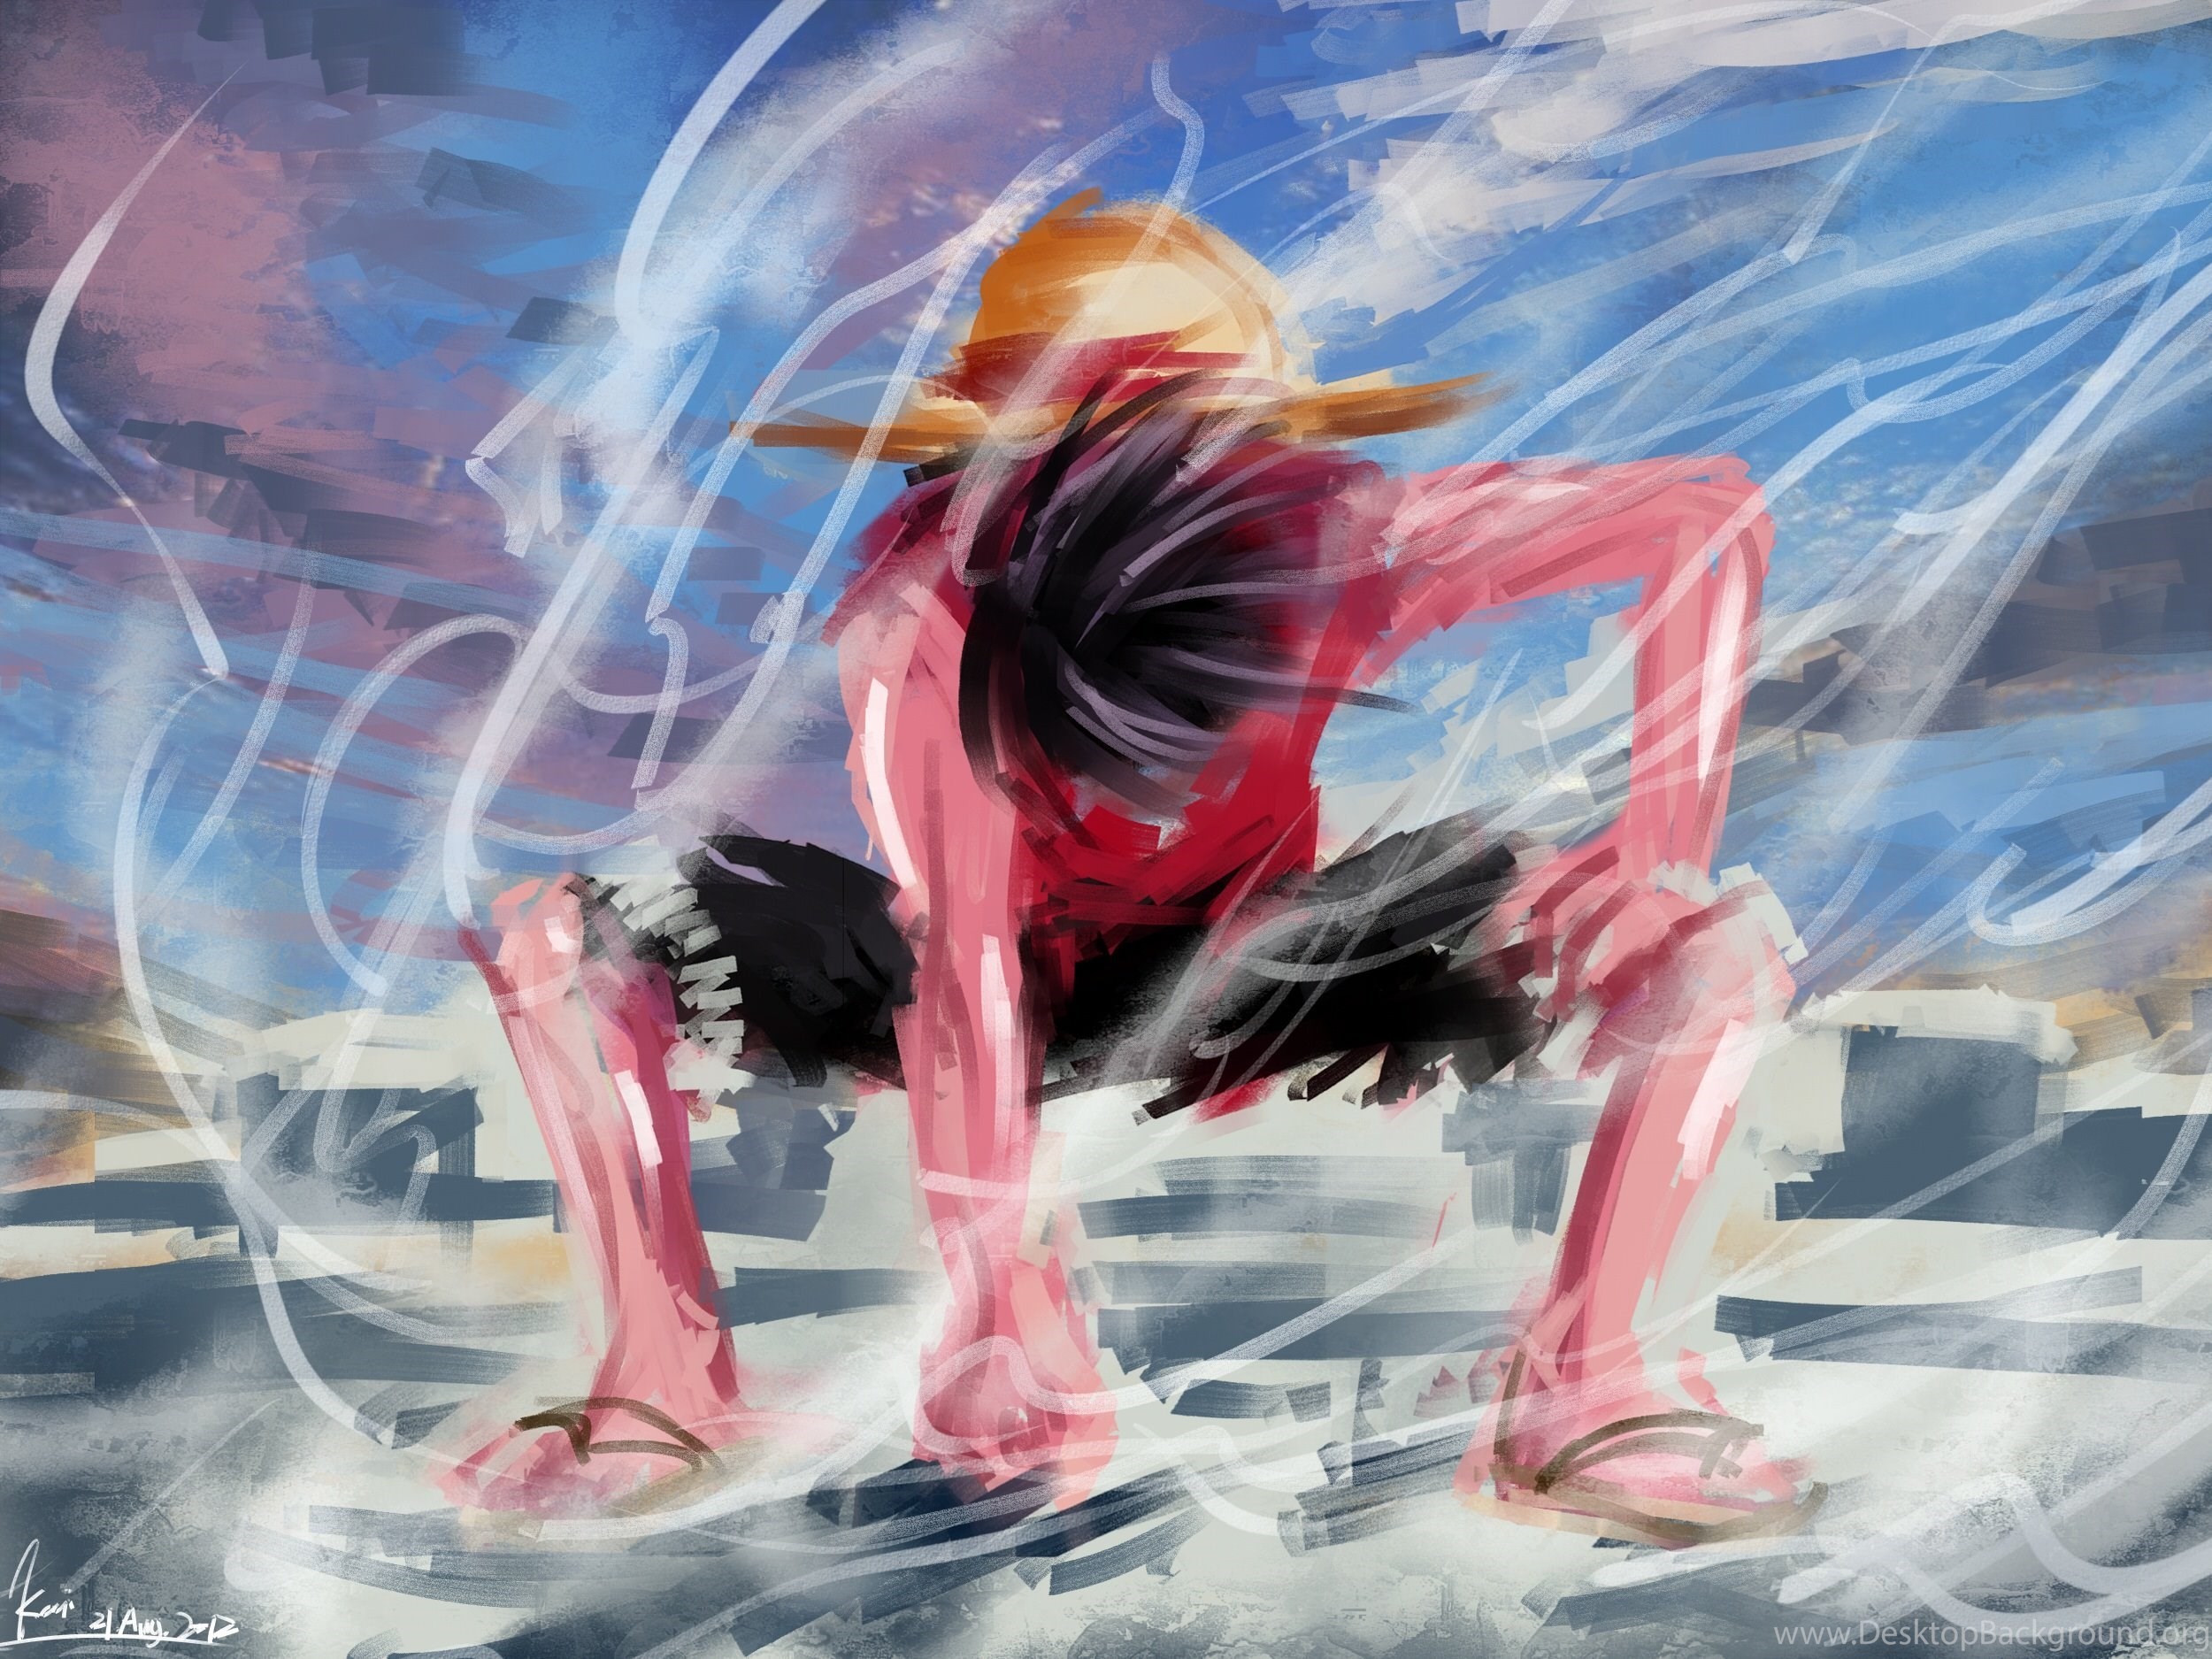 2500x1875 One Piece Wallpaper Luffy Haki Images. Gear fourth ...